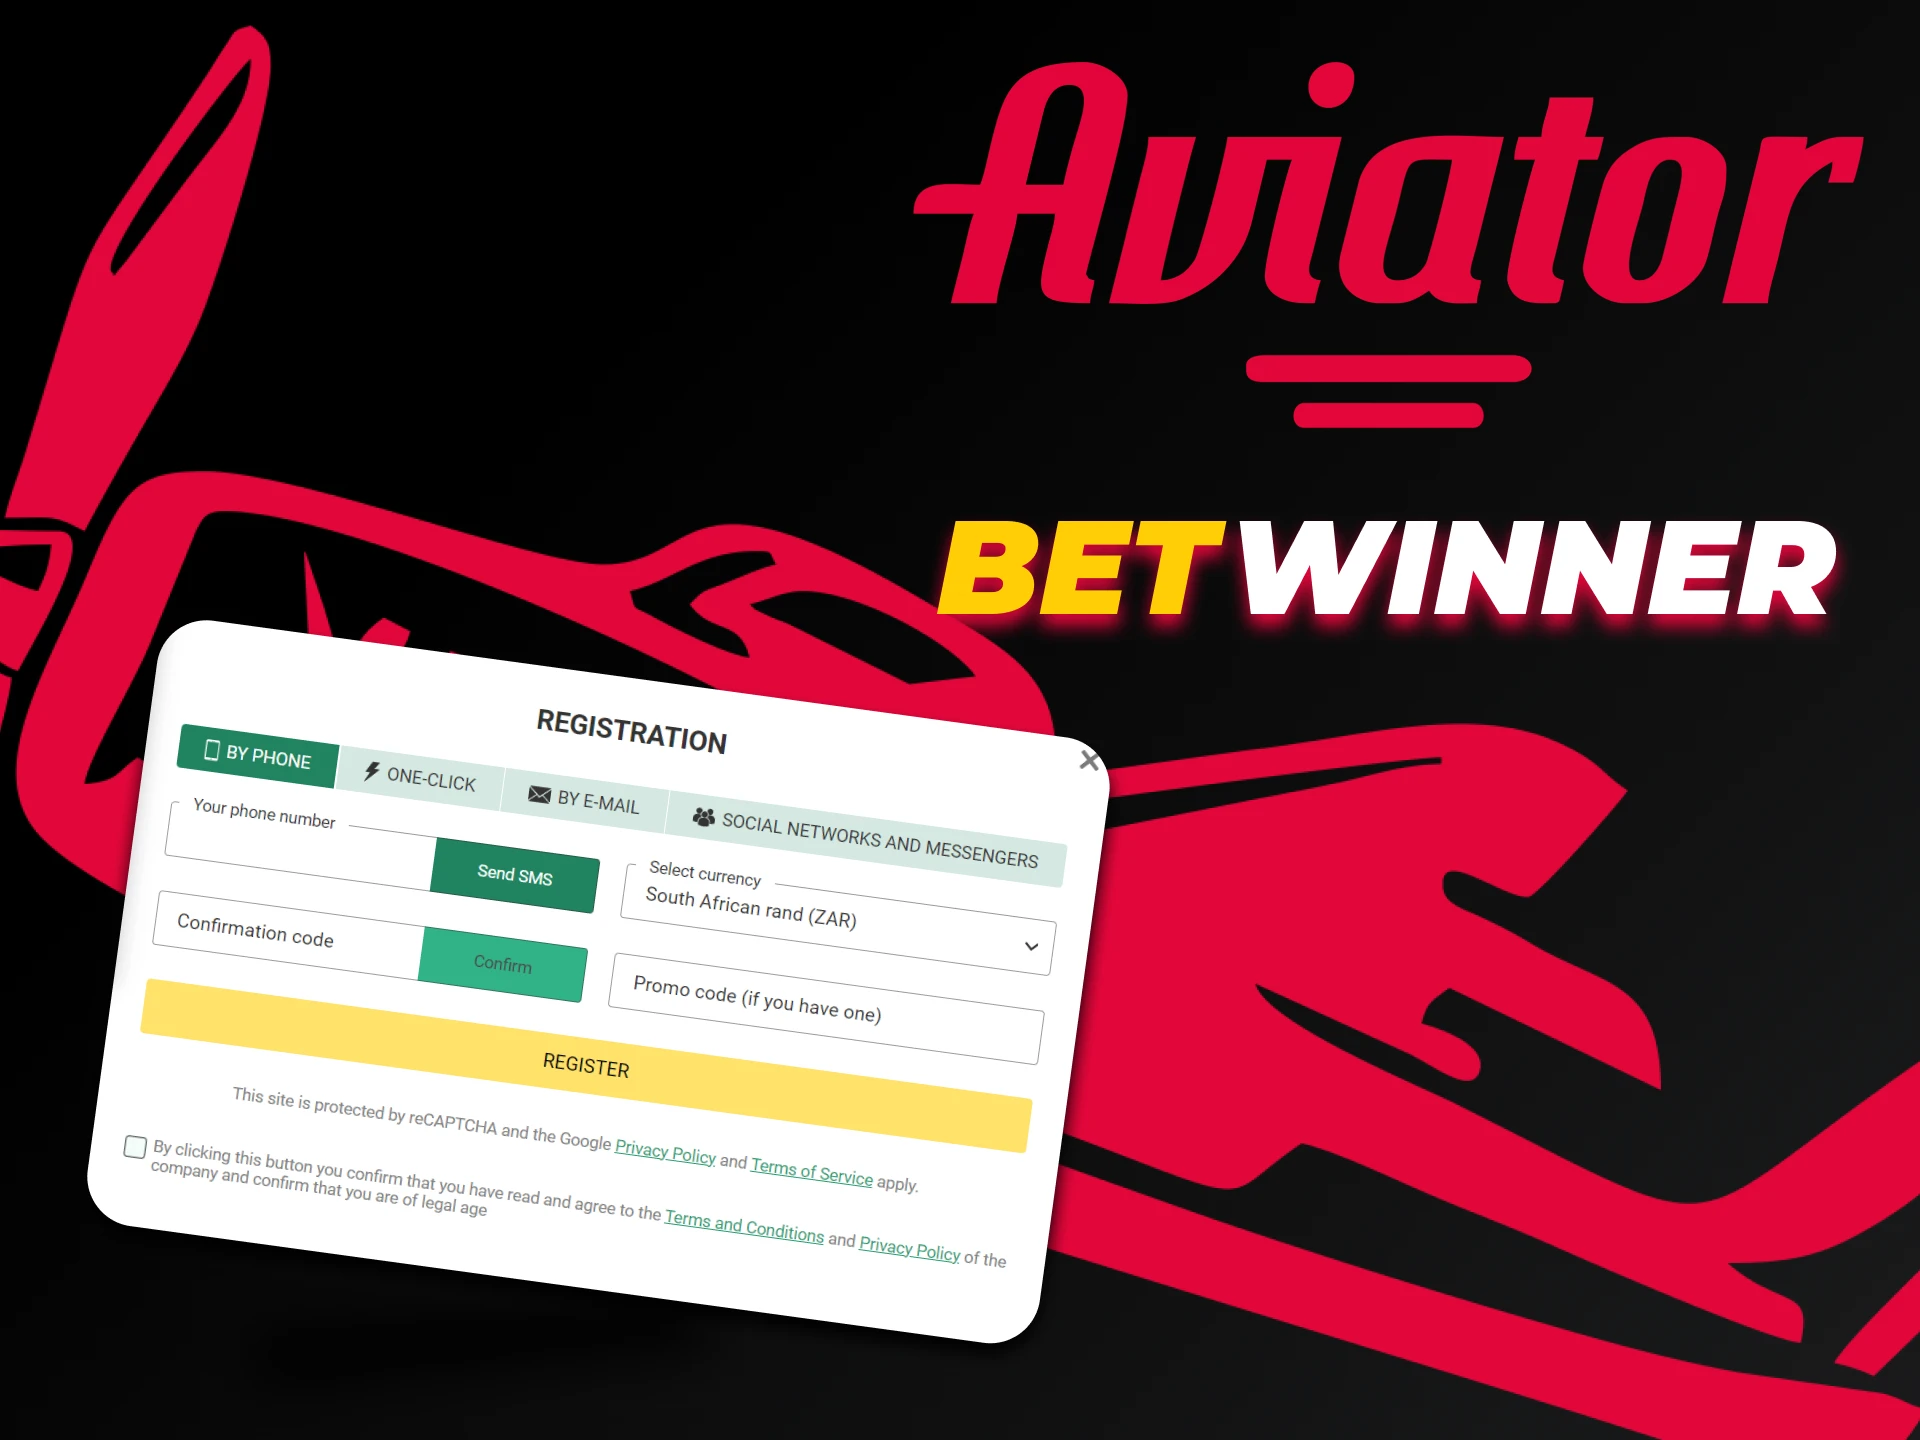 Sign up for Betwinner to play Aviator.